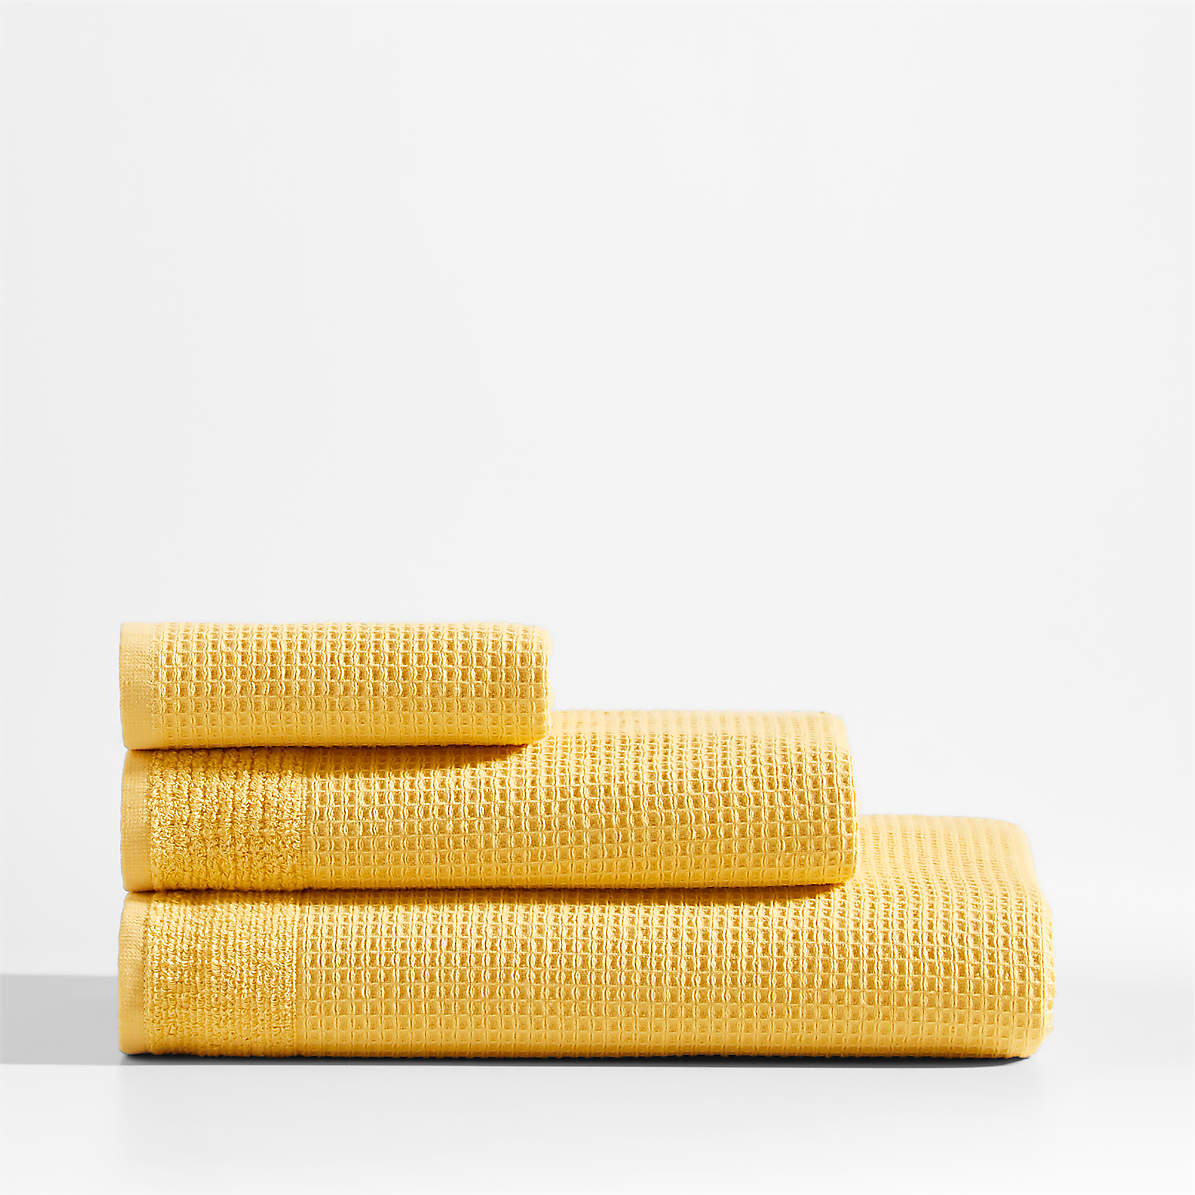 Thirsty Towels, Cotton, Fluffy Waffle Weave, Honeycomb Design, Bath  Towel, Full Size, Golden Yellow